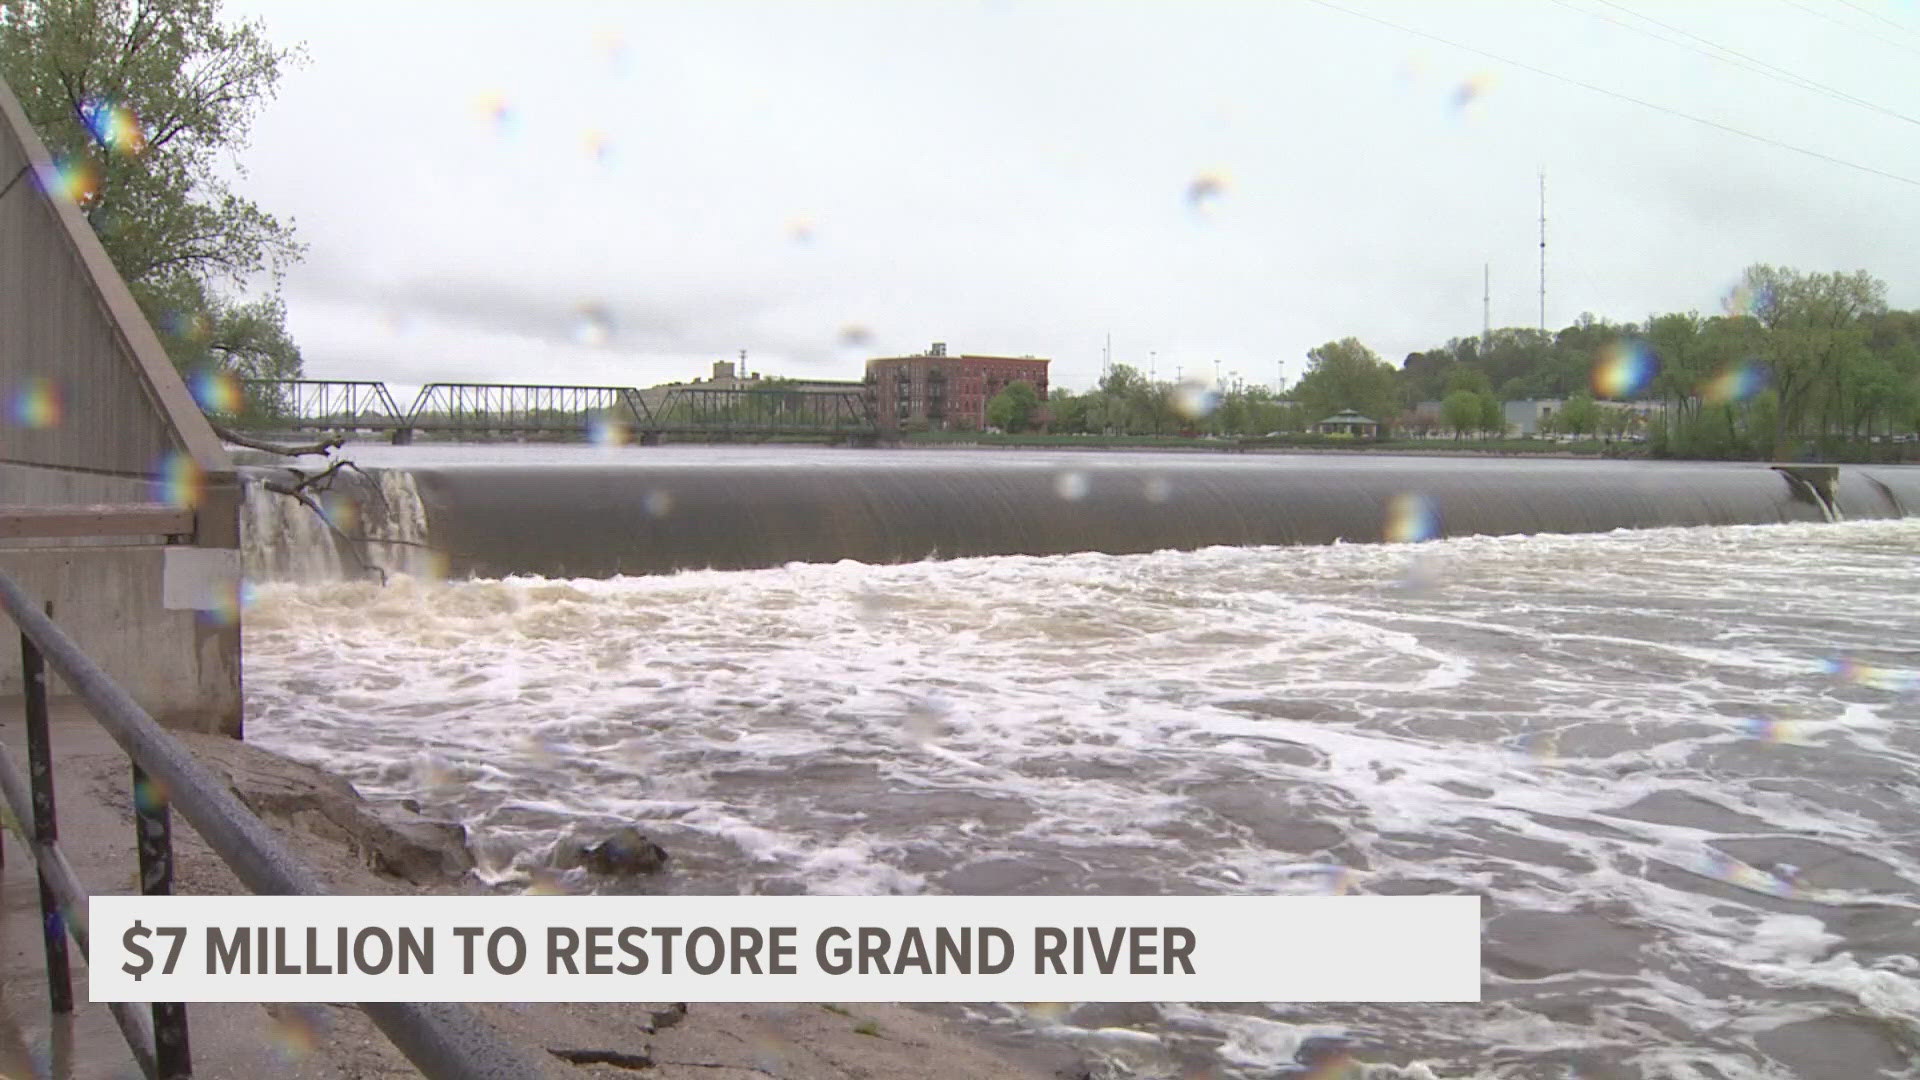 The city says this money can be put toward multiple river-related projects.